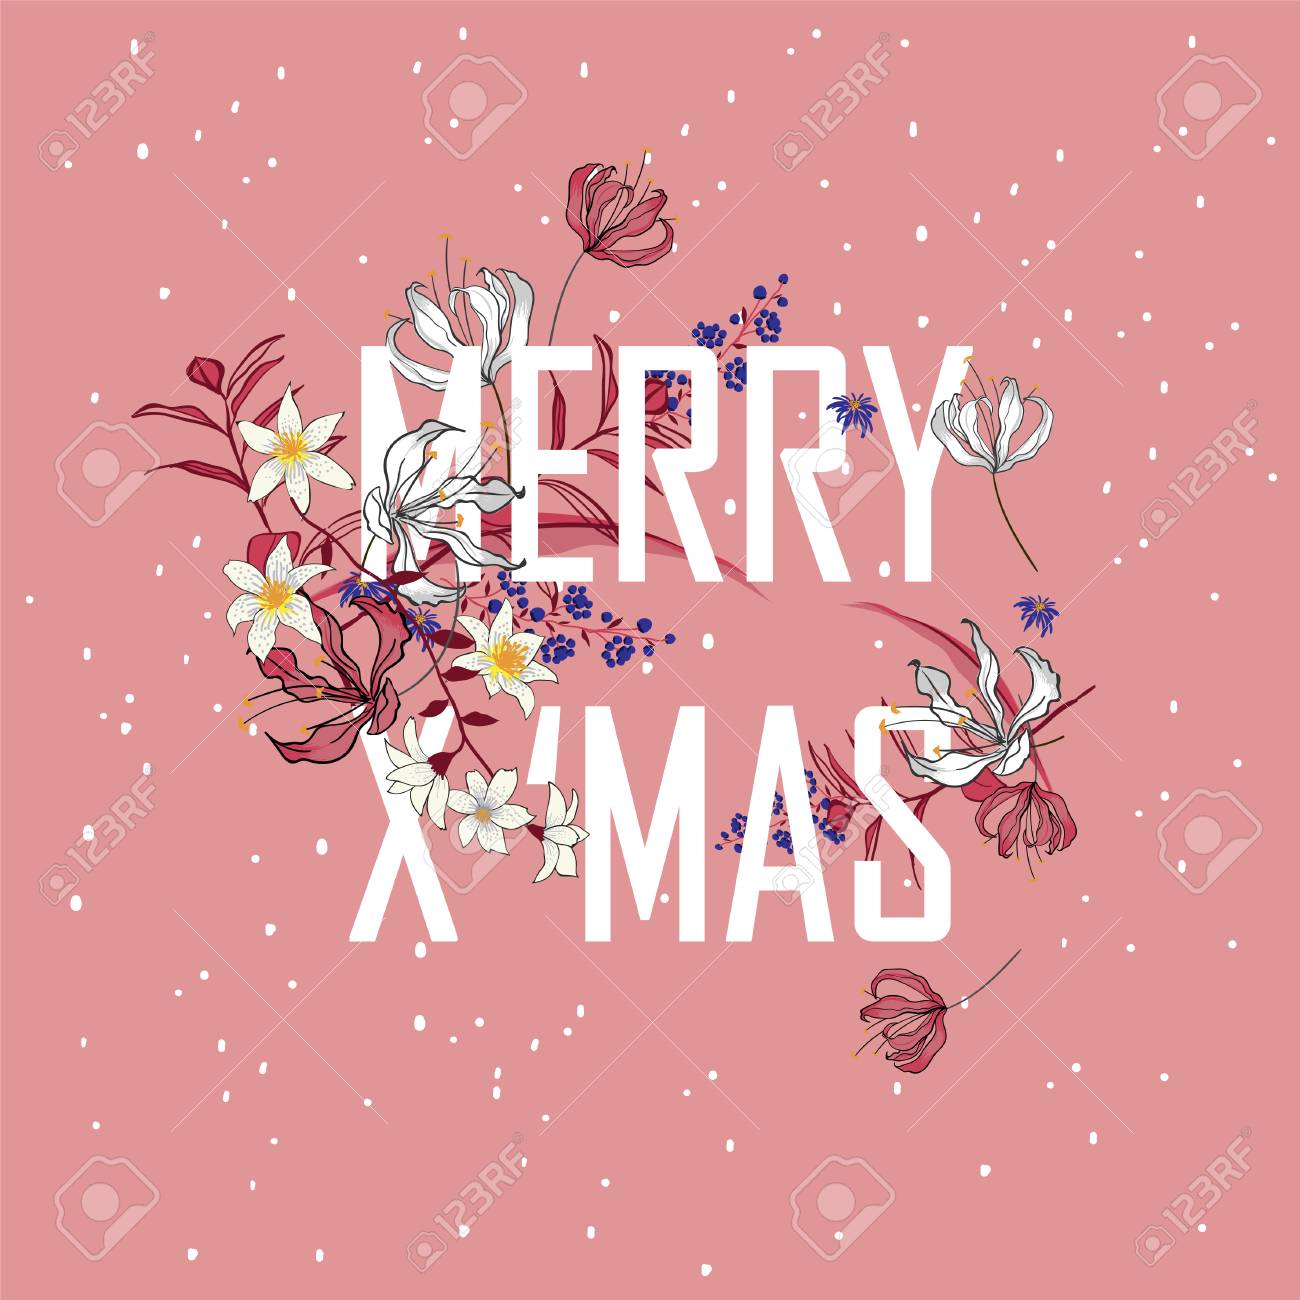 Christmas Blooming Decorative Typo Of Flowers Holiday Garland